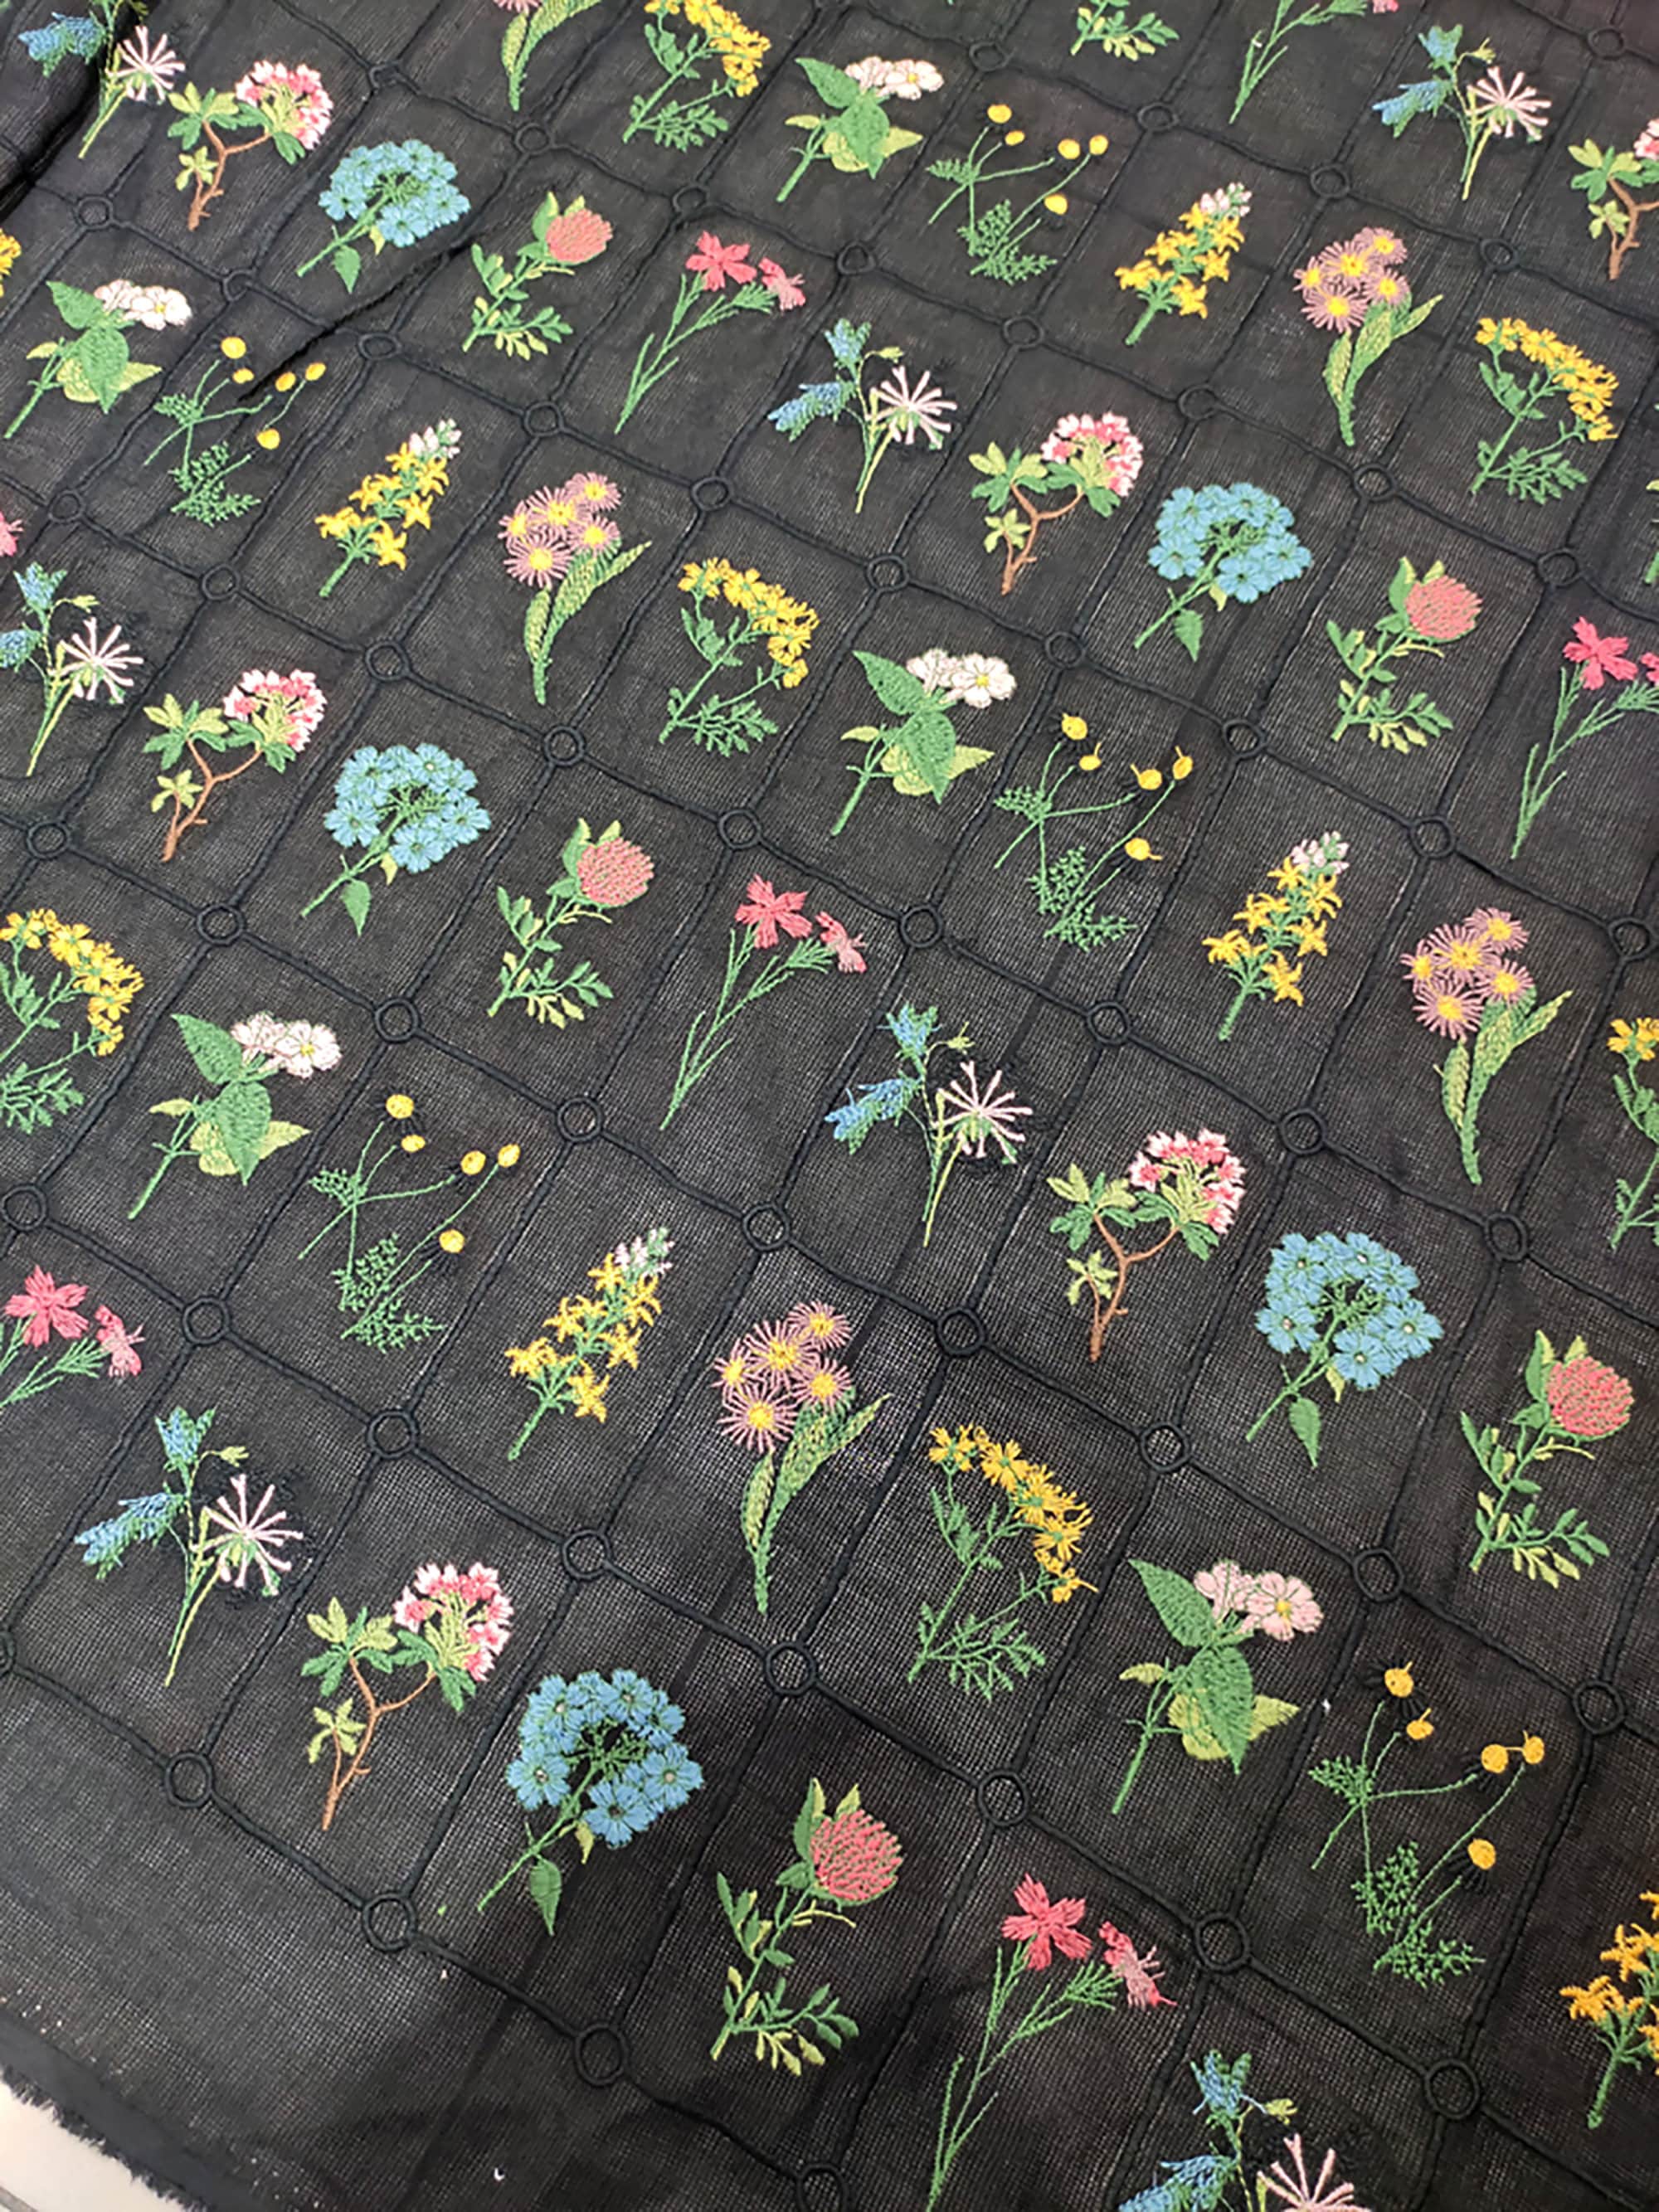 Embroidered Mesh Fabric, Black Net Yarn Fabric, Cotton Lace Fabric, Soft  Plaid Floral Fabrics, Flower Curtain Fabric, by the Yard/meter, C10 